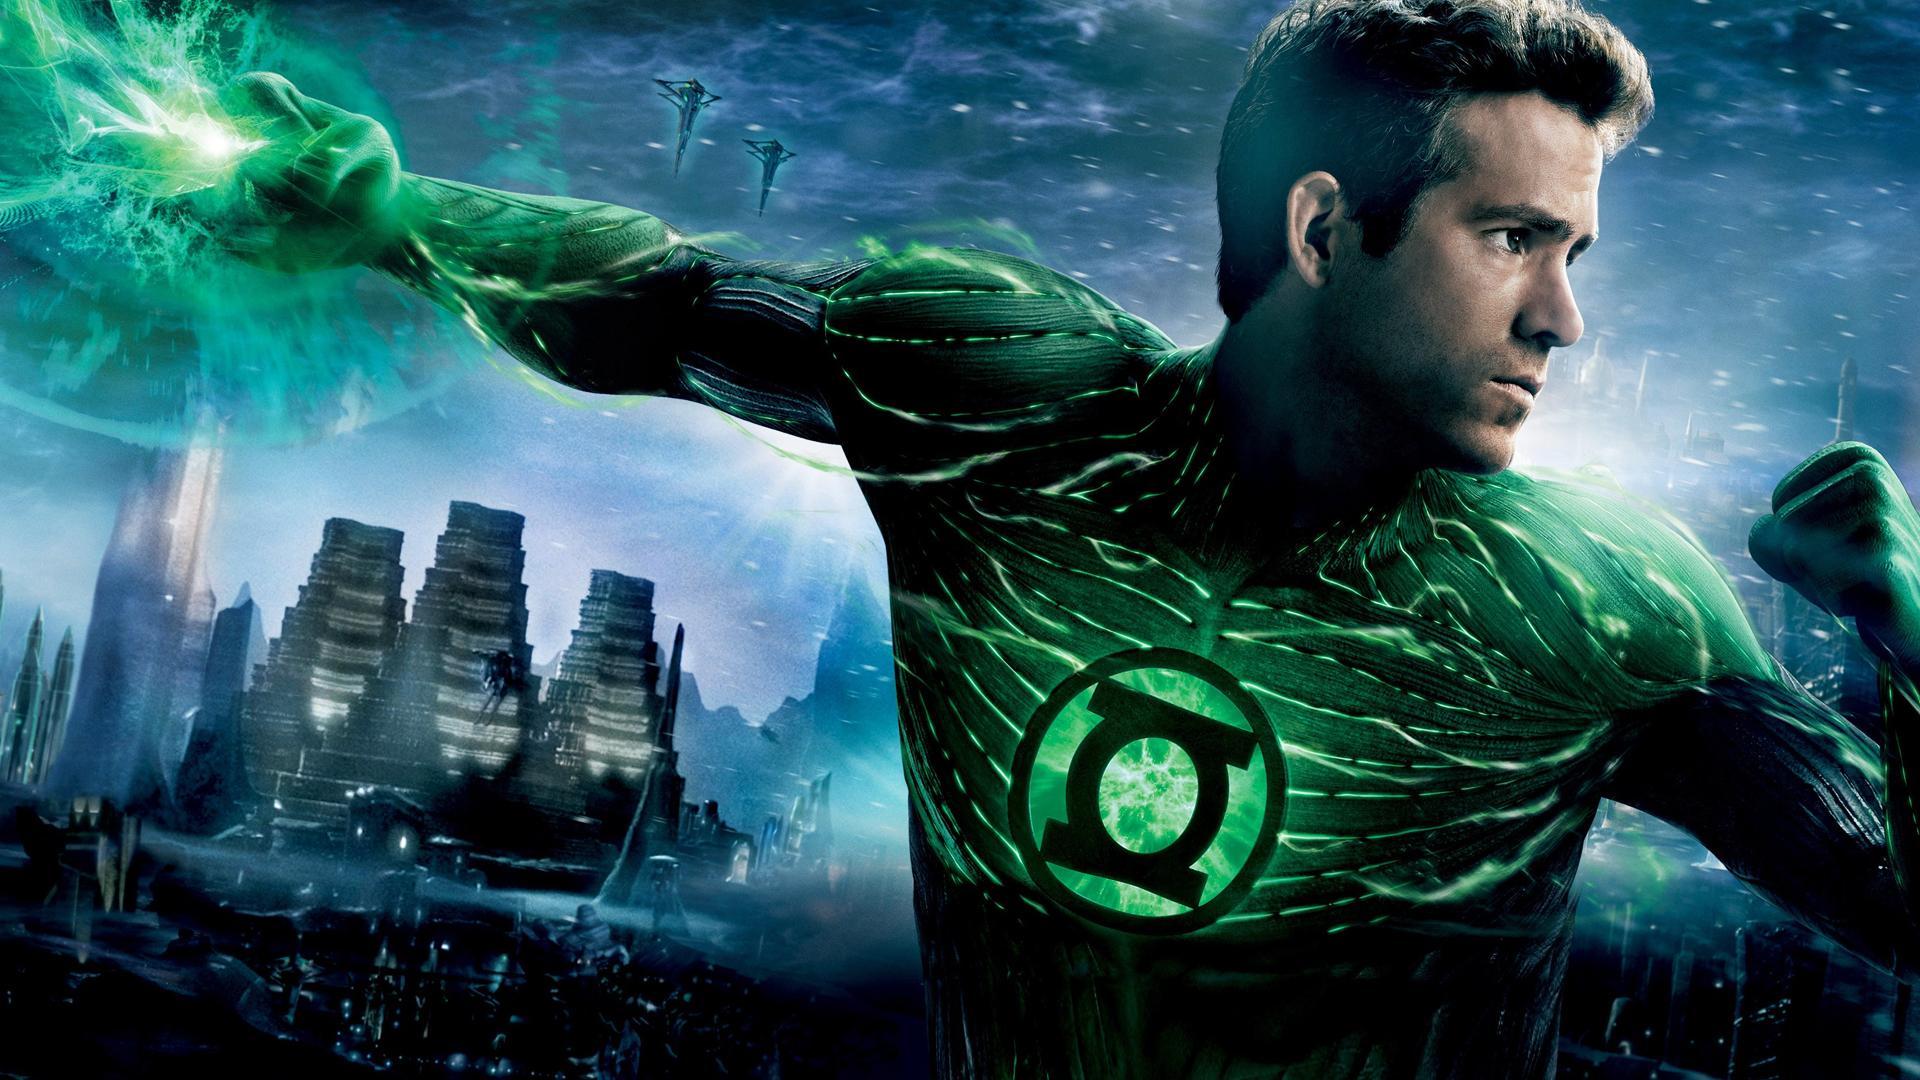 Green Lantern Corps may have found director in Rise of the Planet of the Apes's Rupert Wyatt